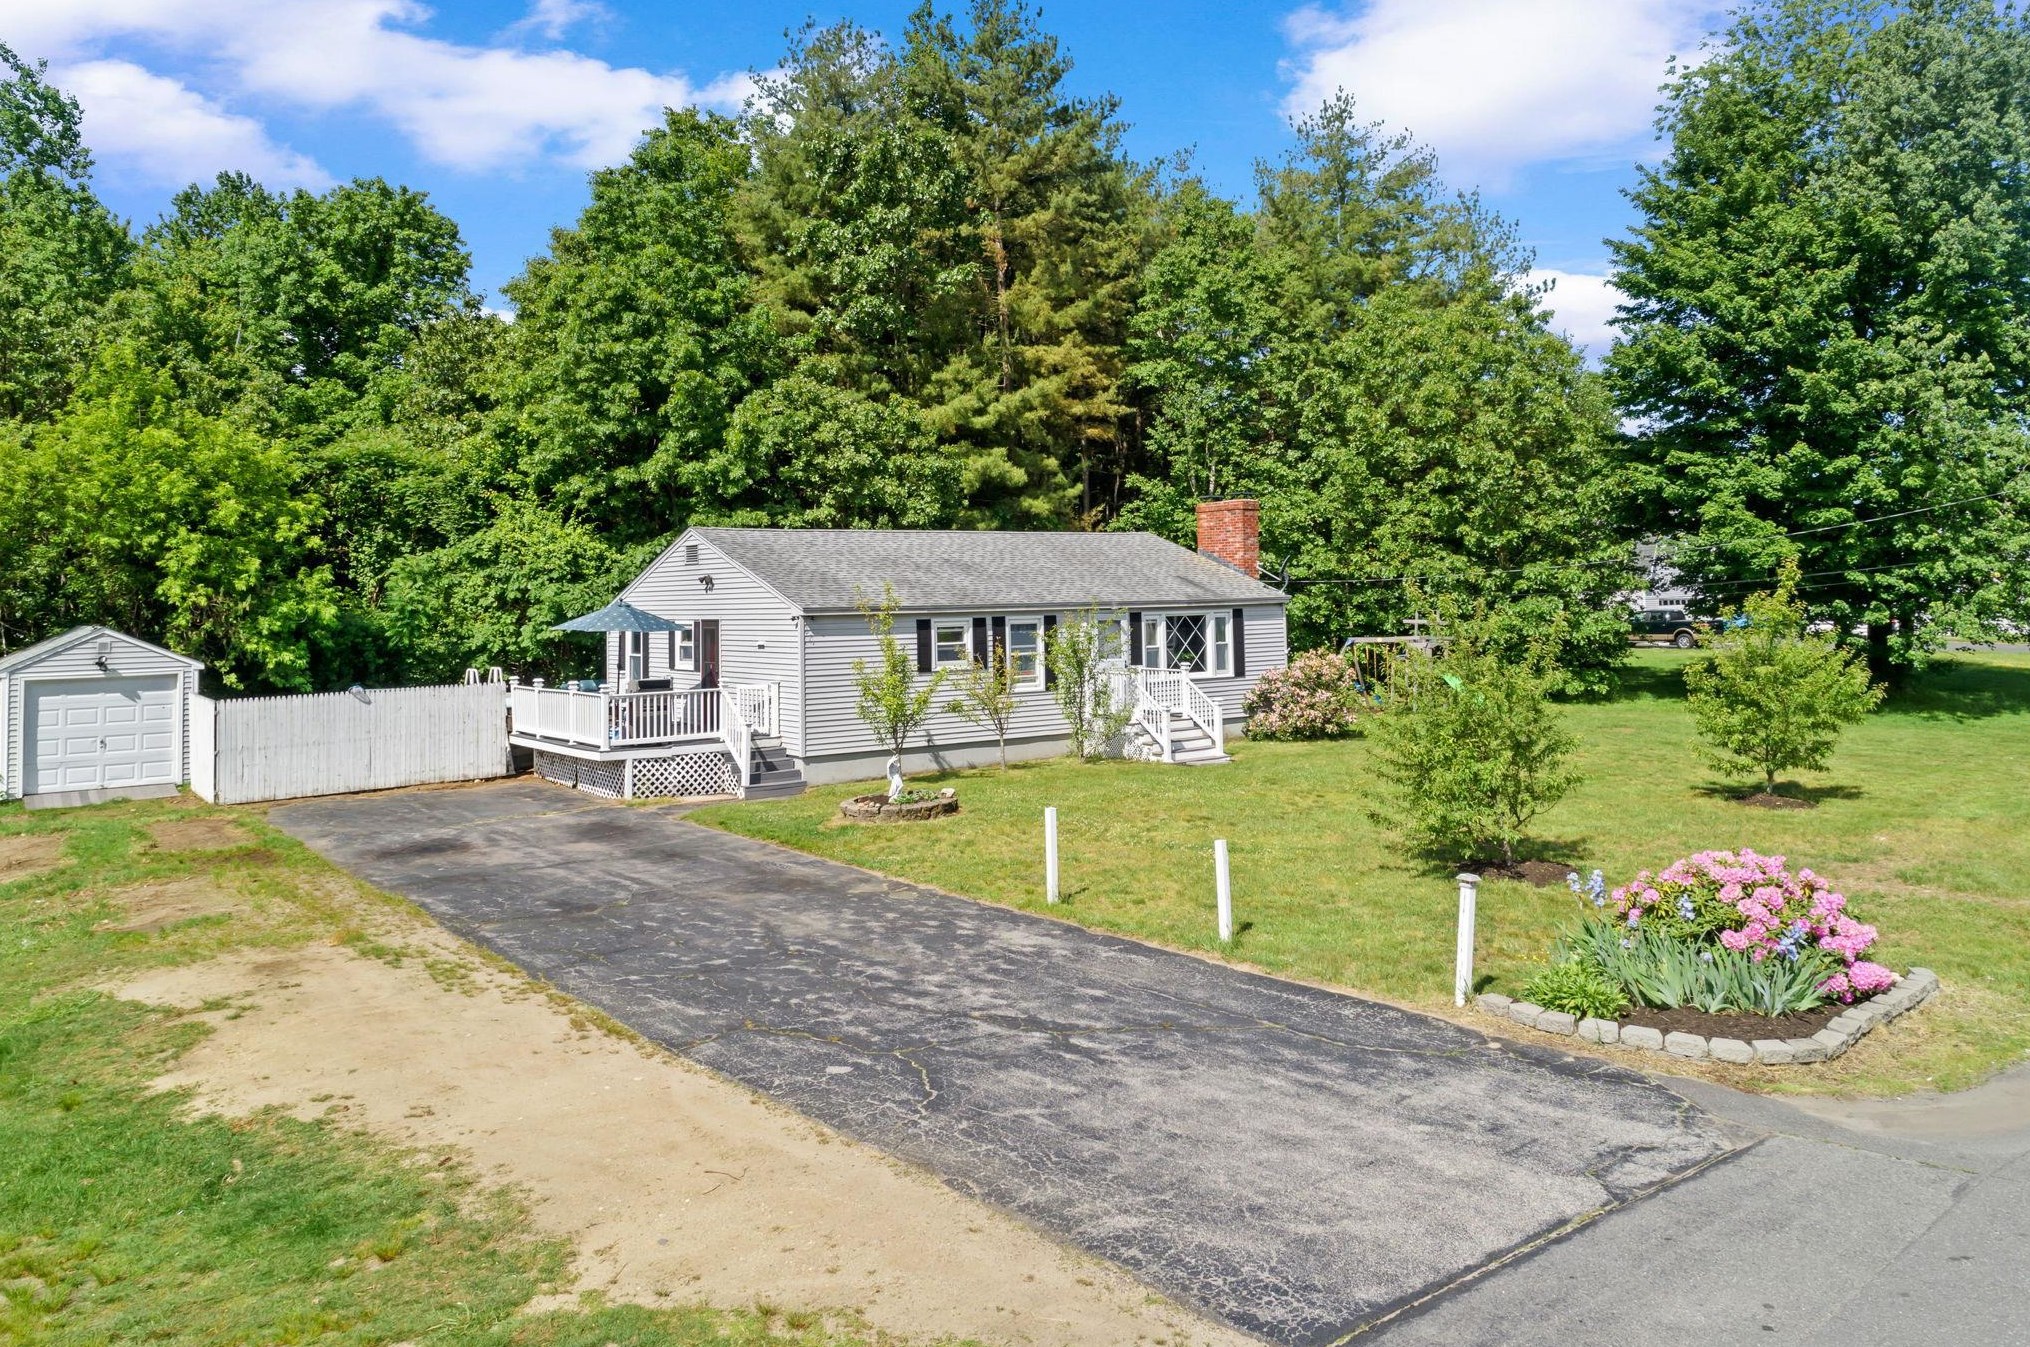 77 Fordway Ext, Derry, NH 03038